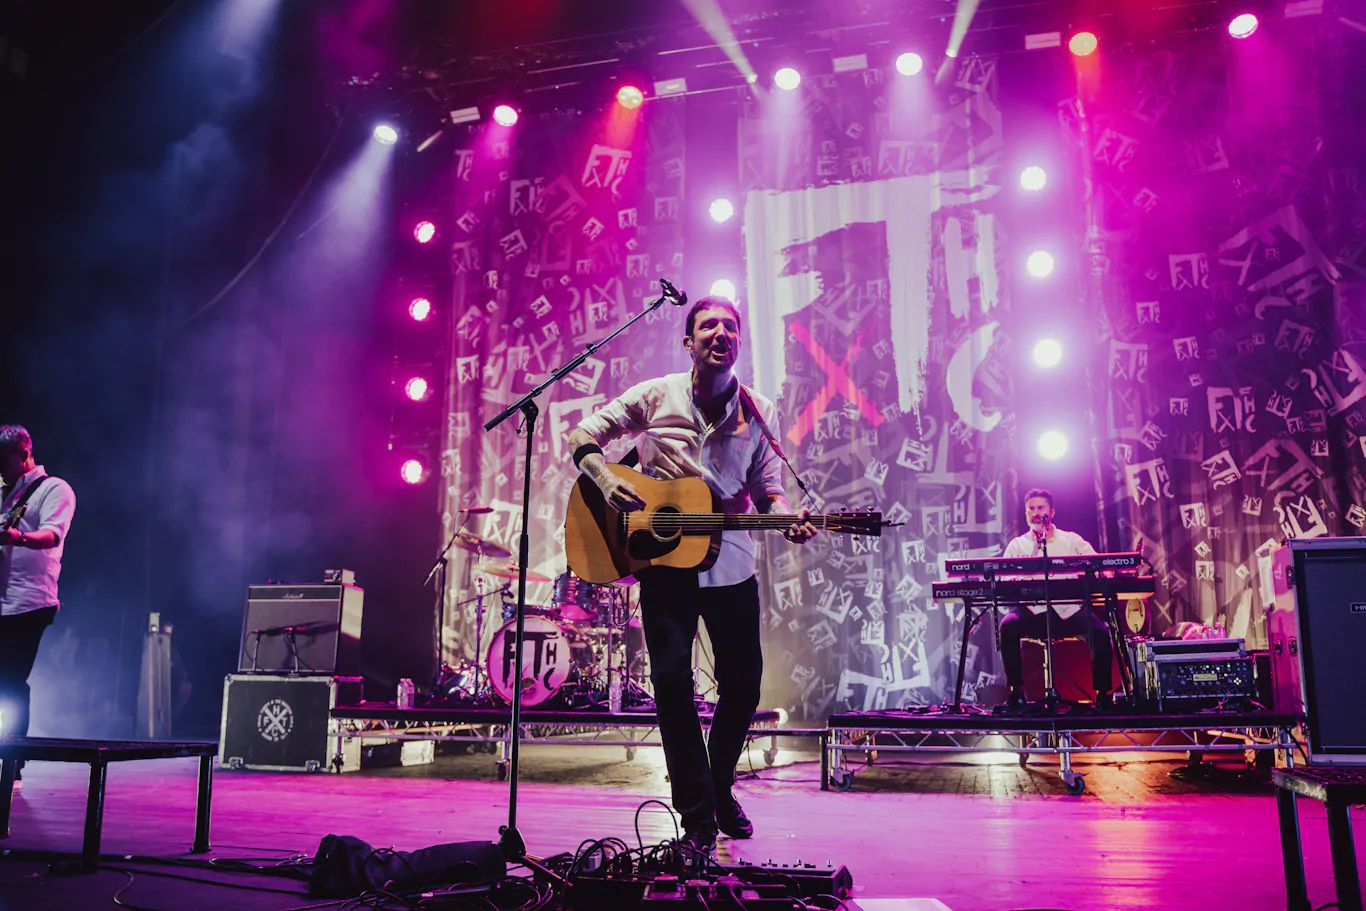 LIVE REVIEW: Frank Turner and the Sleeping Souls at Brixton Academy, London